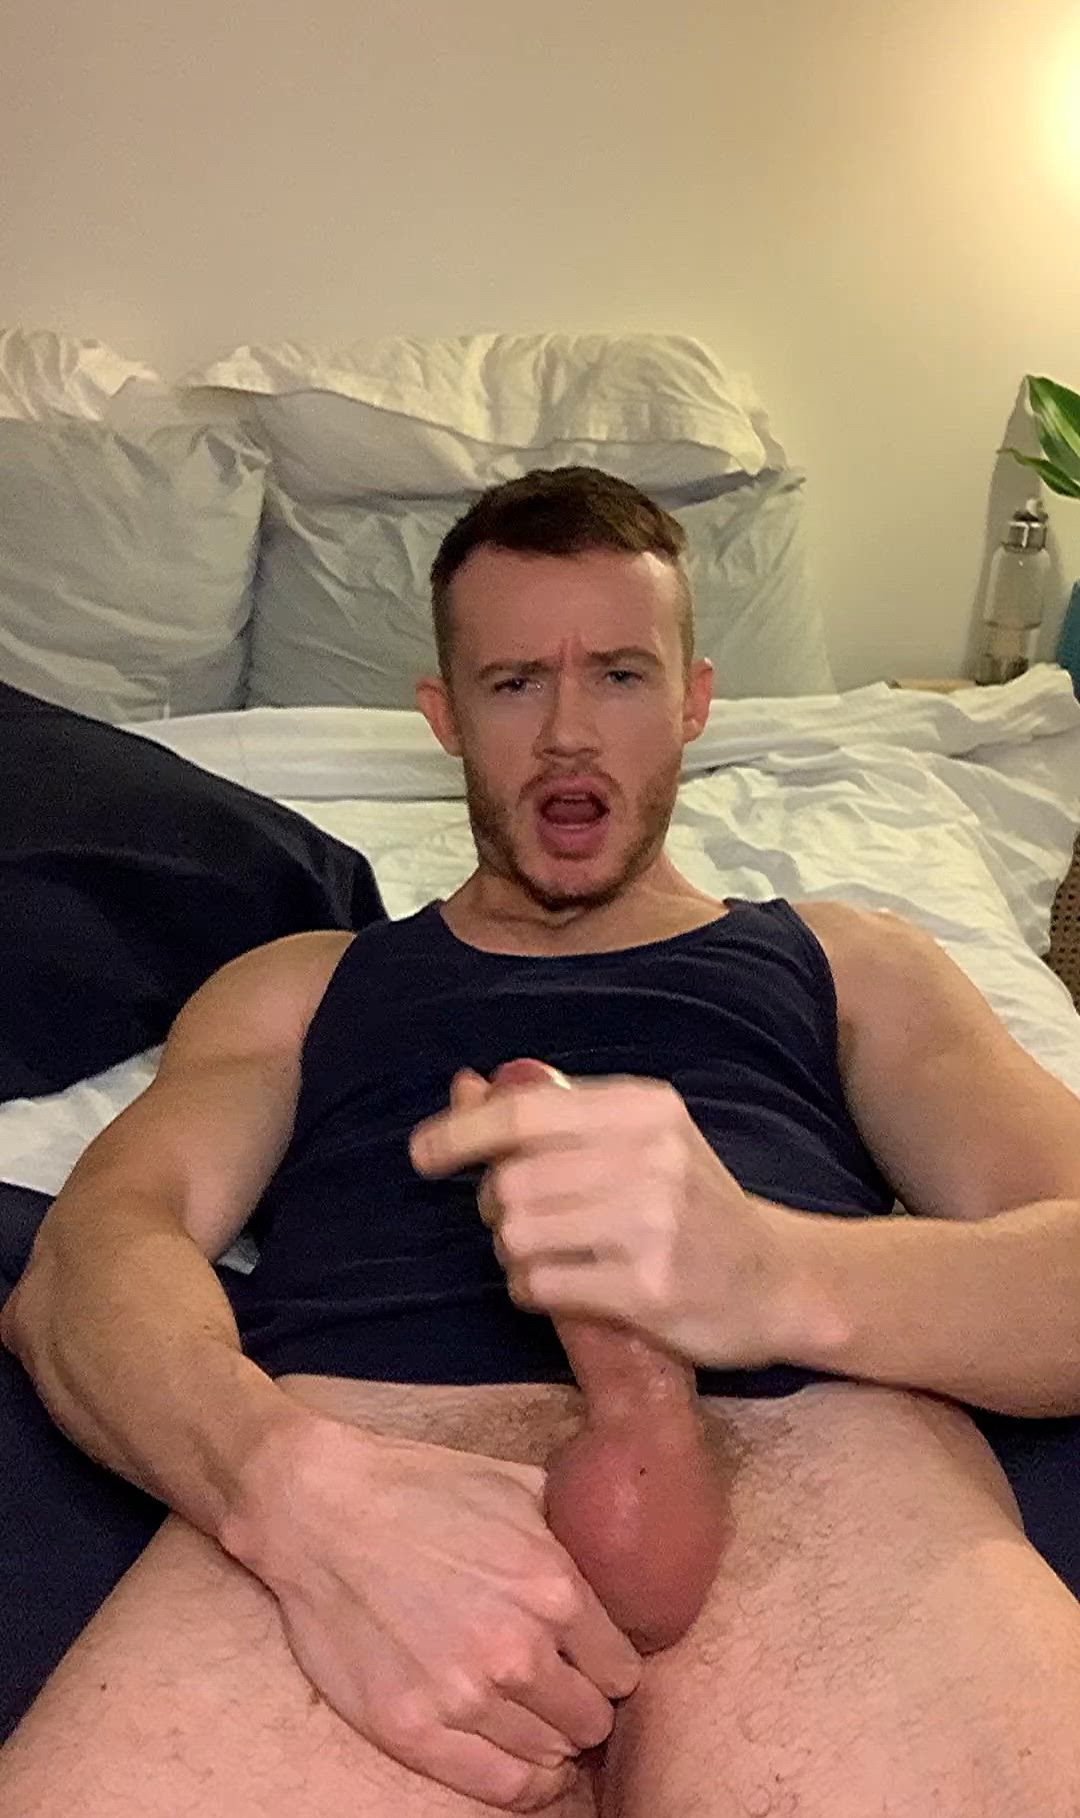 Big Dick porn video with onlyfans model tj8hung <strong>@tj8hung</strong>